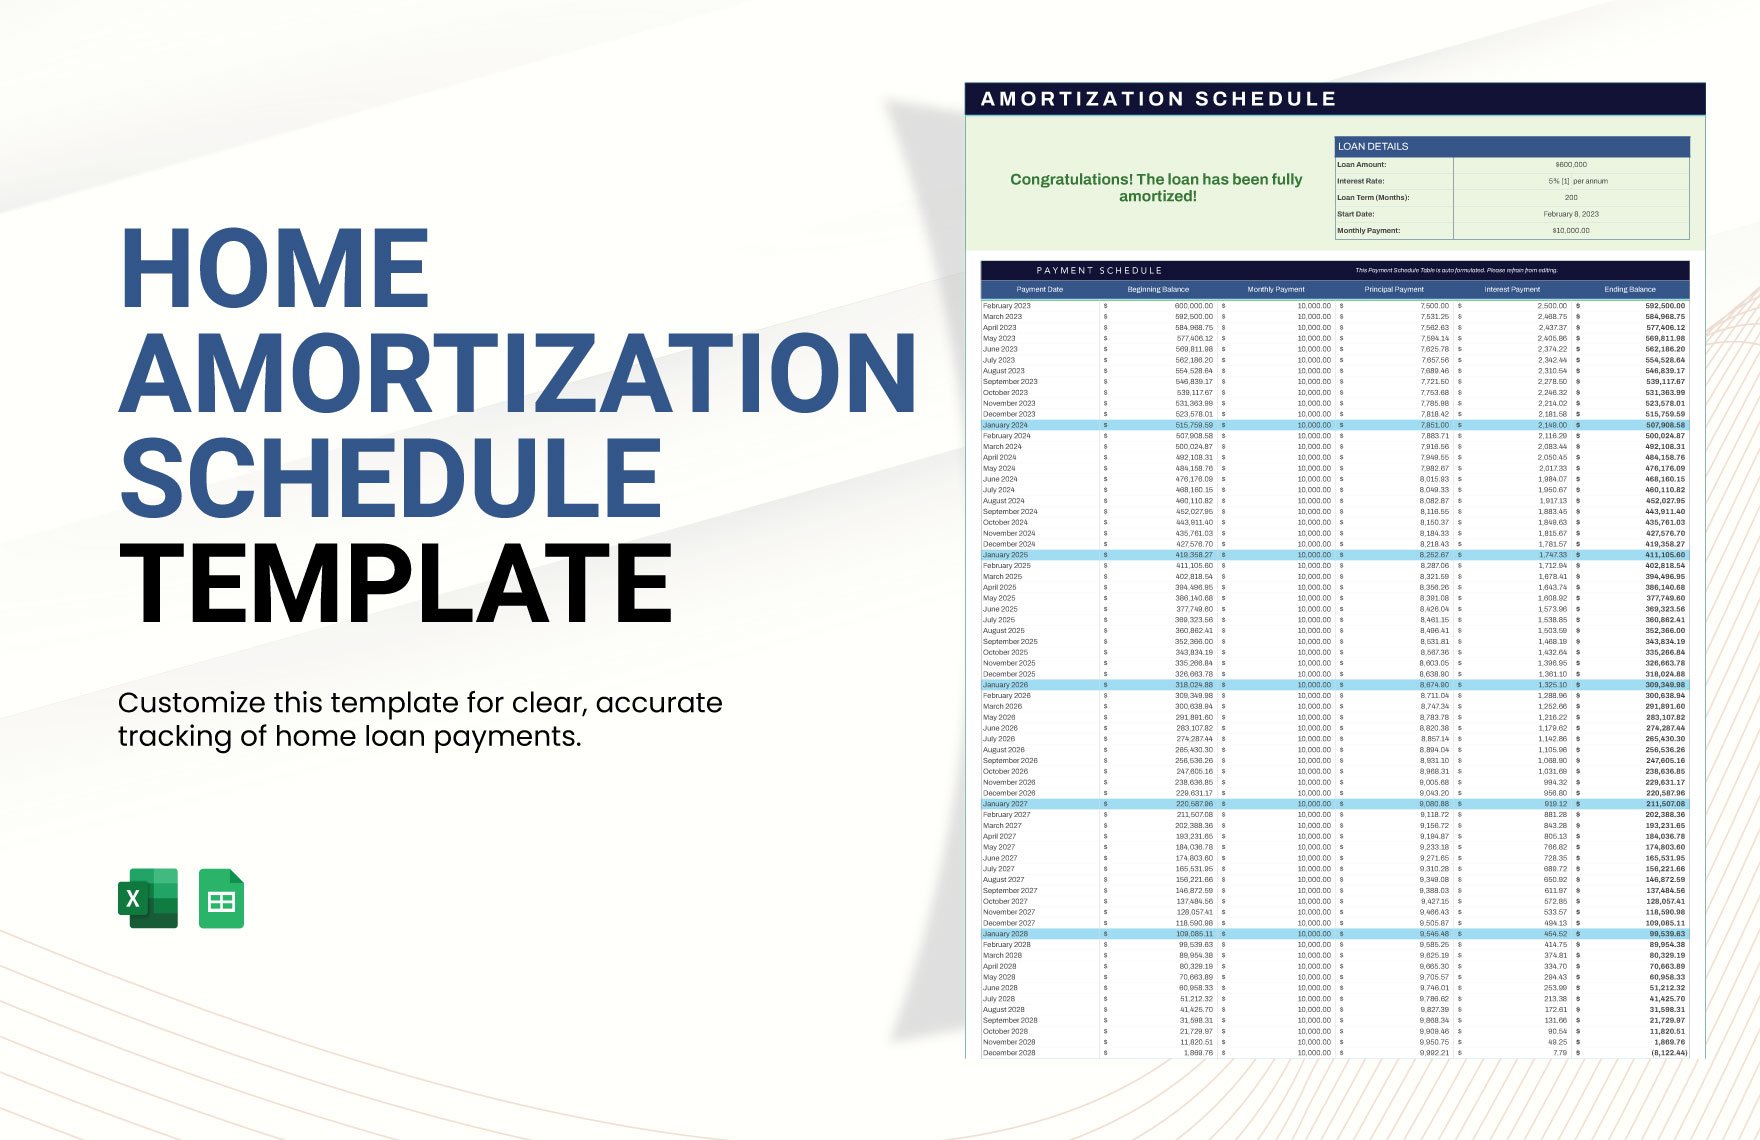 Home Amortization Schedule Template in Excel, Google Sheets